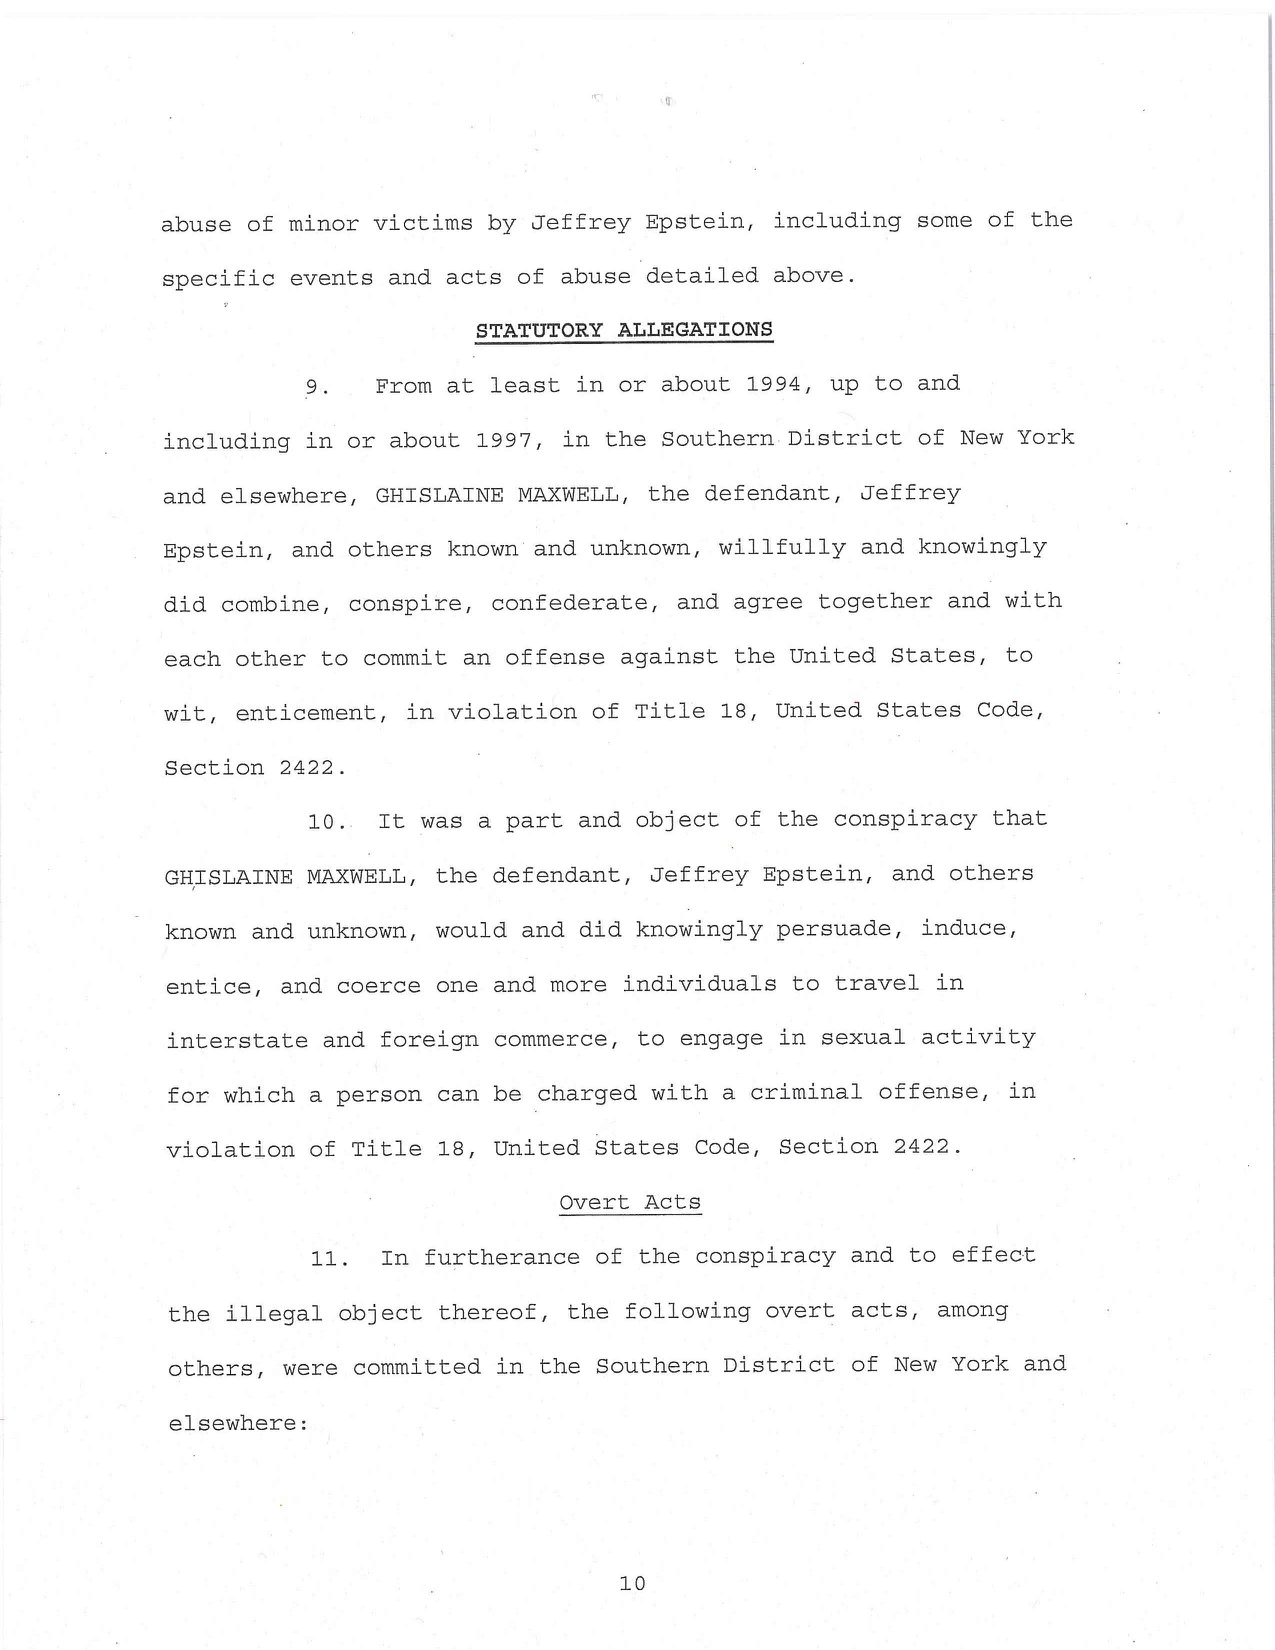 The United States vs Ghislaine Maxwell - abuse of minor victims by Jeffrey Epstein, including some of the specific events and acts of abuse detailed above. Statutory Allegations From at least in or about 1994, up to and including in or about 1997, in the